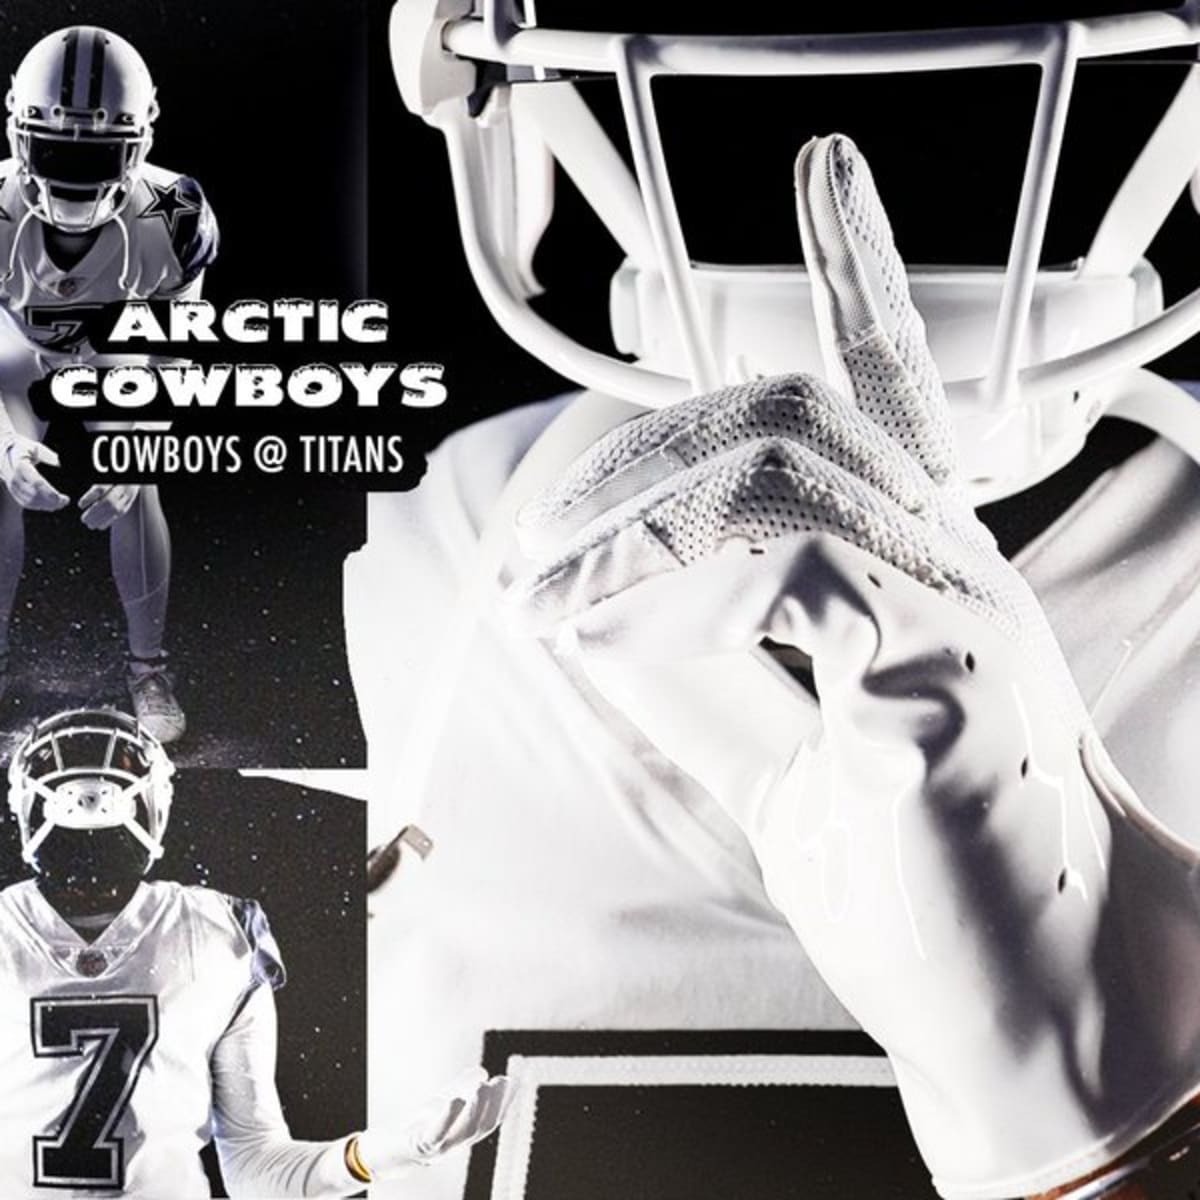 NFL: The Cowboys should always wear their all-white Color Rush unis